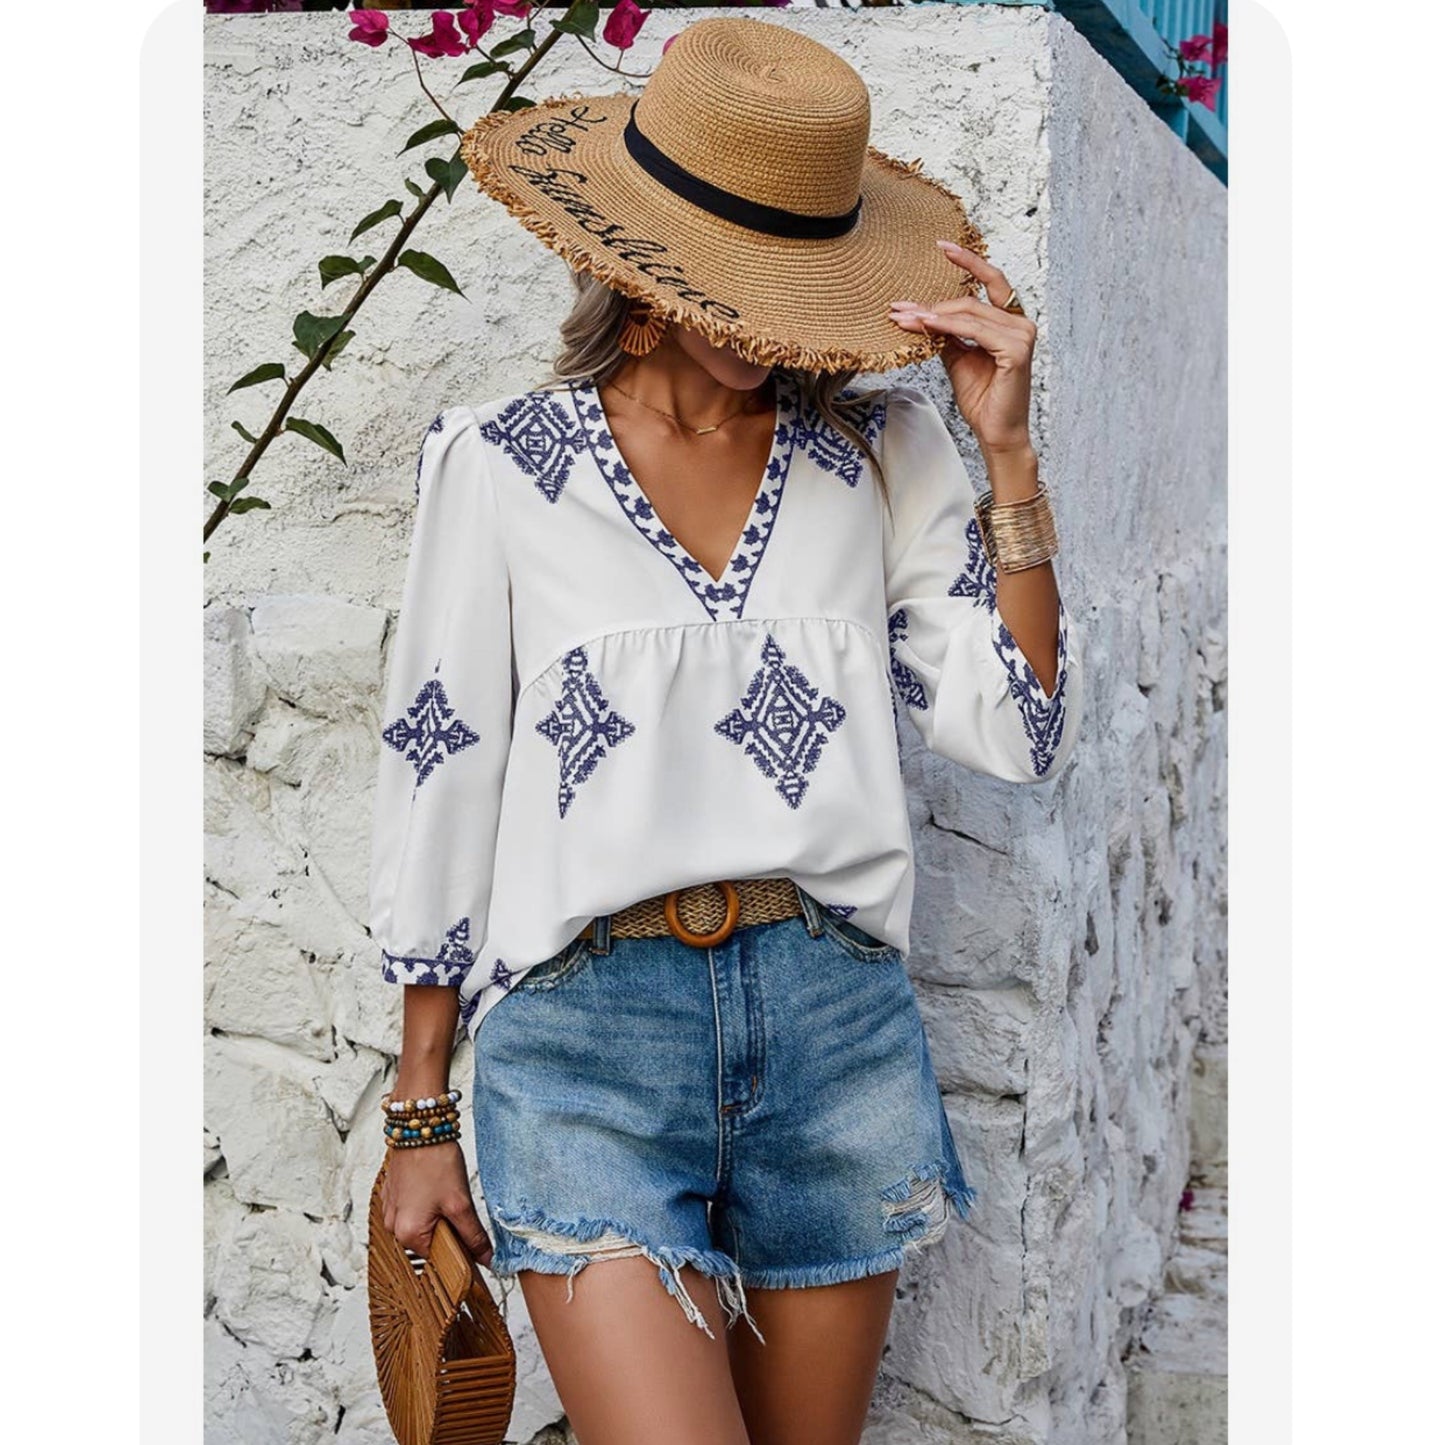 Boho Beachy V Neck Printed Loose Fit Blouse White with Blue Details